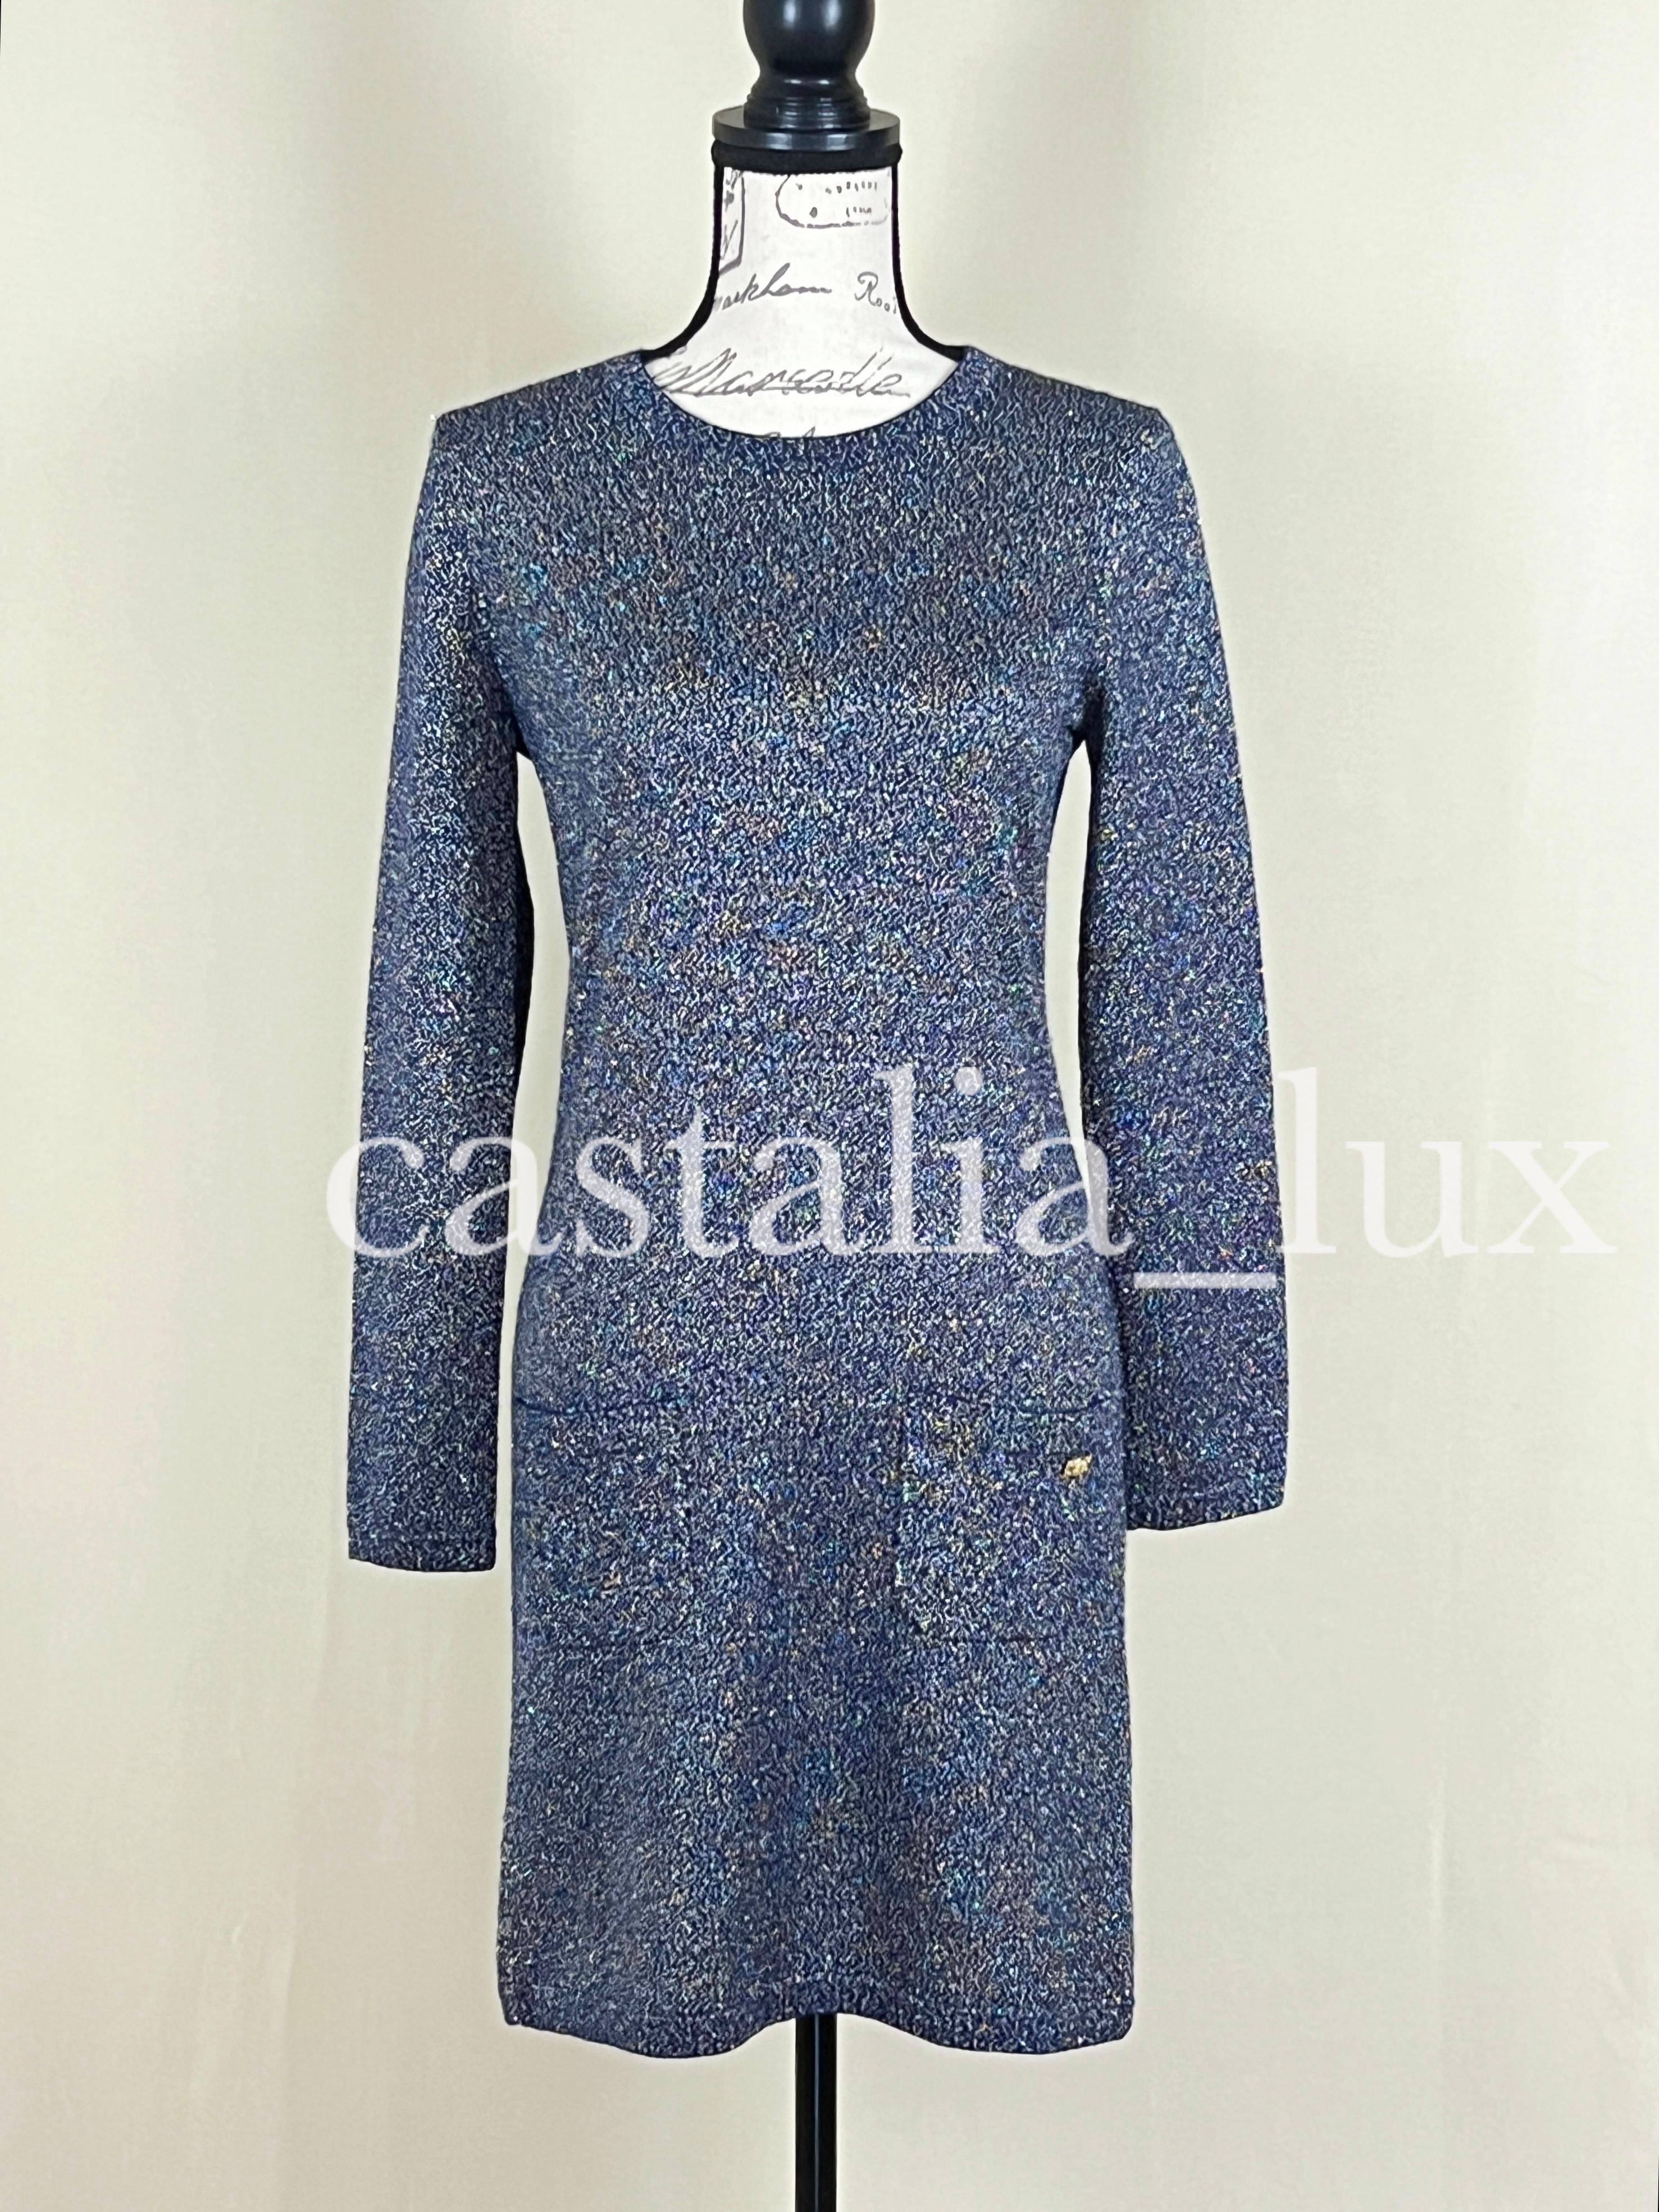 Women's or Men's Chanel New Paris / Byzance Shimmer Cashmere Dress For Sale